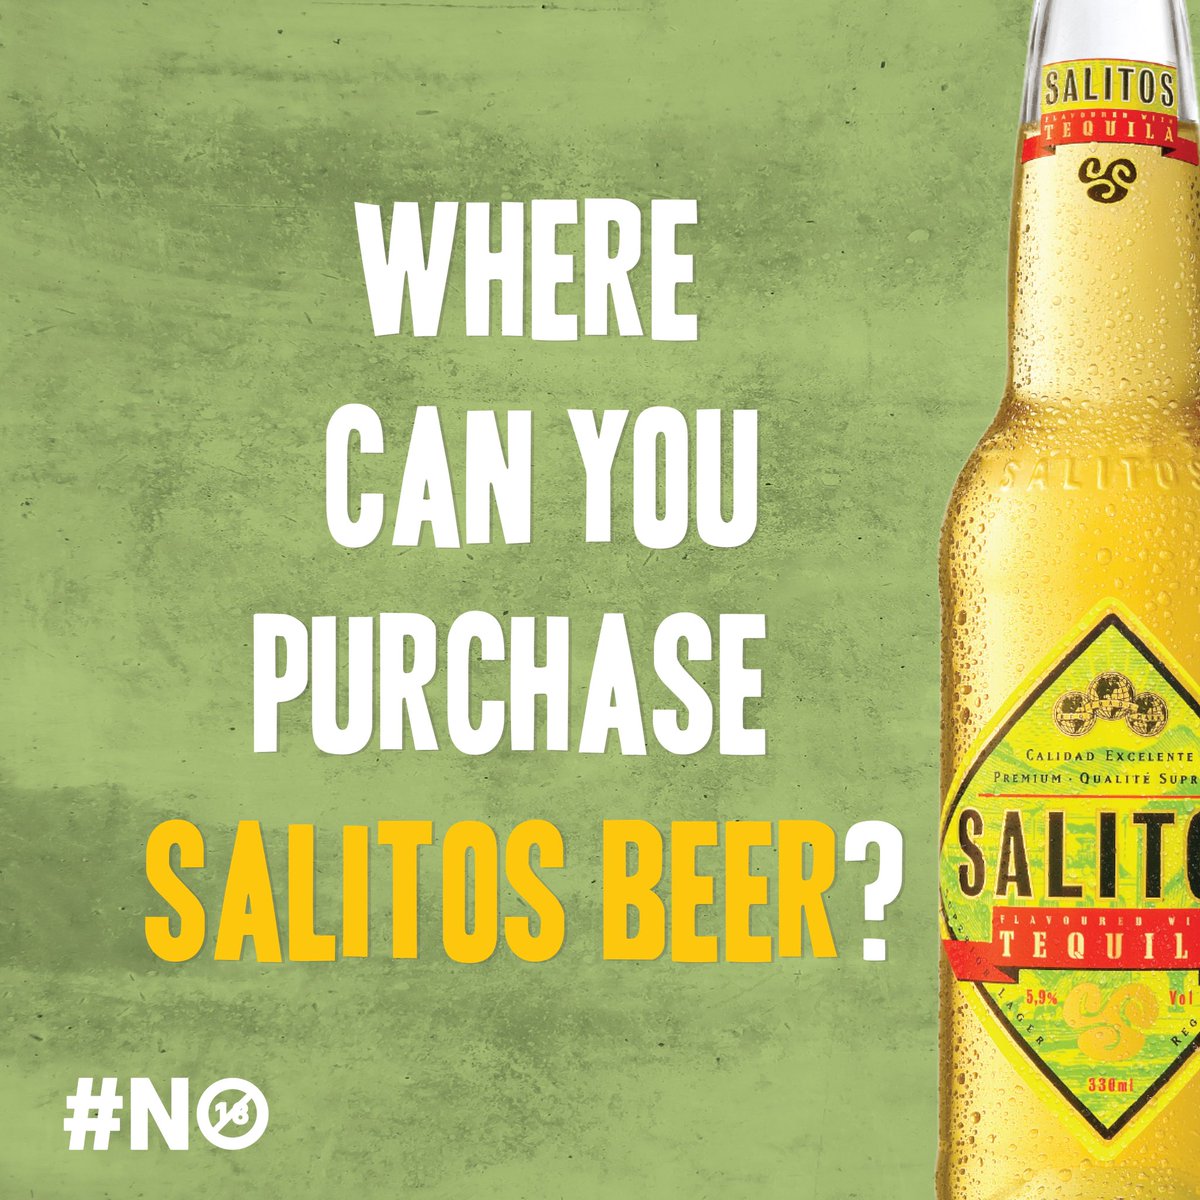 Looking to bringing the fiesta to your own backyard? SALITOS is now available @TAKEALOT com, @normangoodfello , @SparUltraLiquor, or @BlueBottles. 👇 No shame in stocking up for the month, or 2. 😜🍺 🛒🍻 Shop Now: bit.ly/3RYAtao #SalitosBeer #SALITOSRepublic